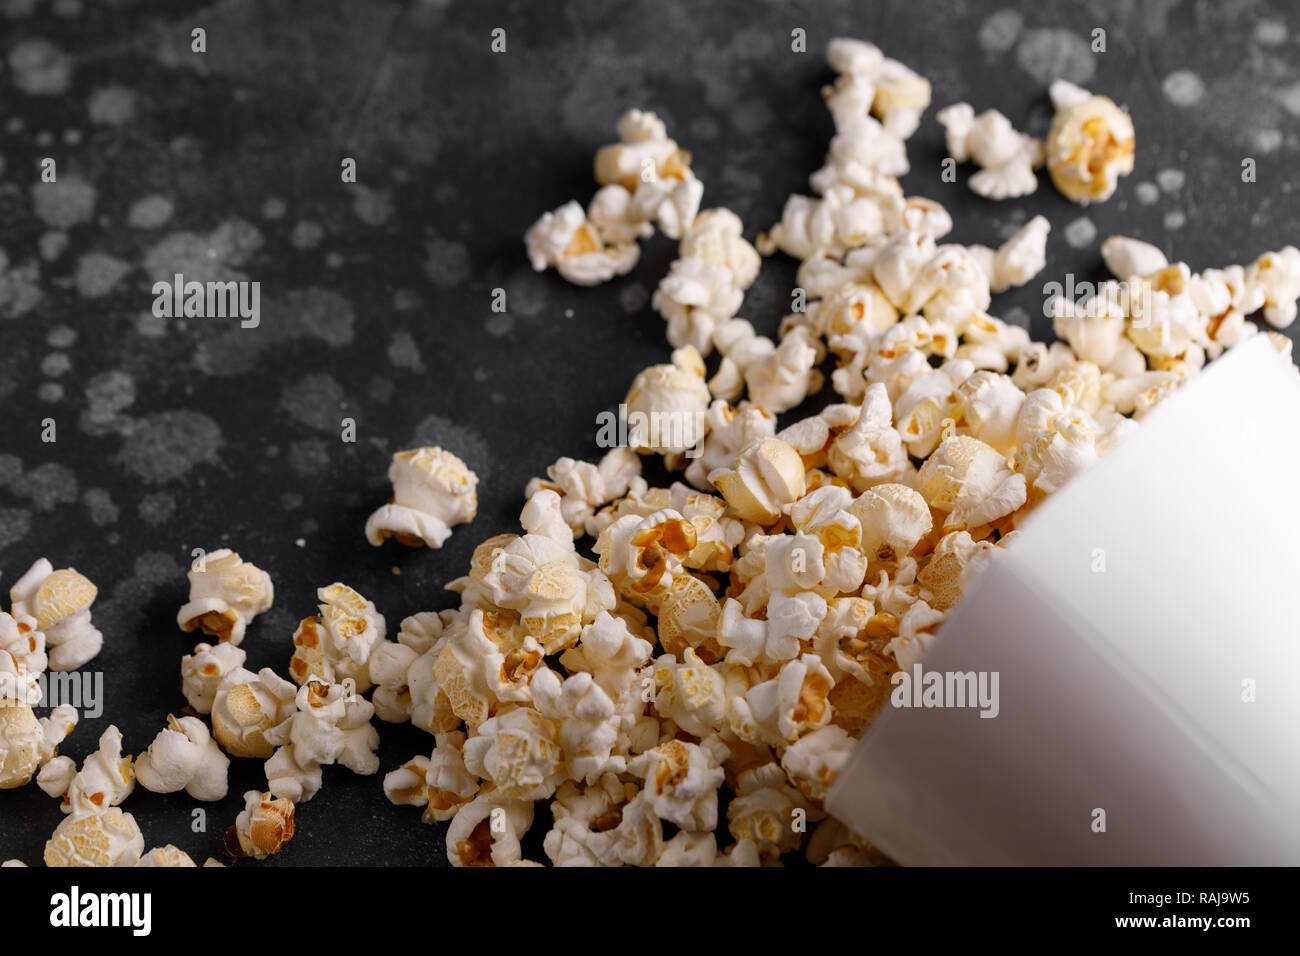 Snack for watching movies. Popcorn bucket upside down on a textural background. Close-up. Stock Photo